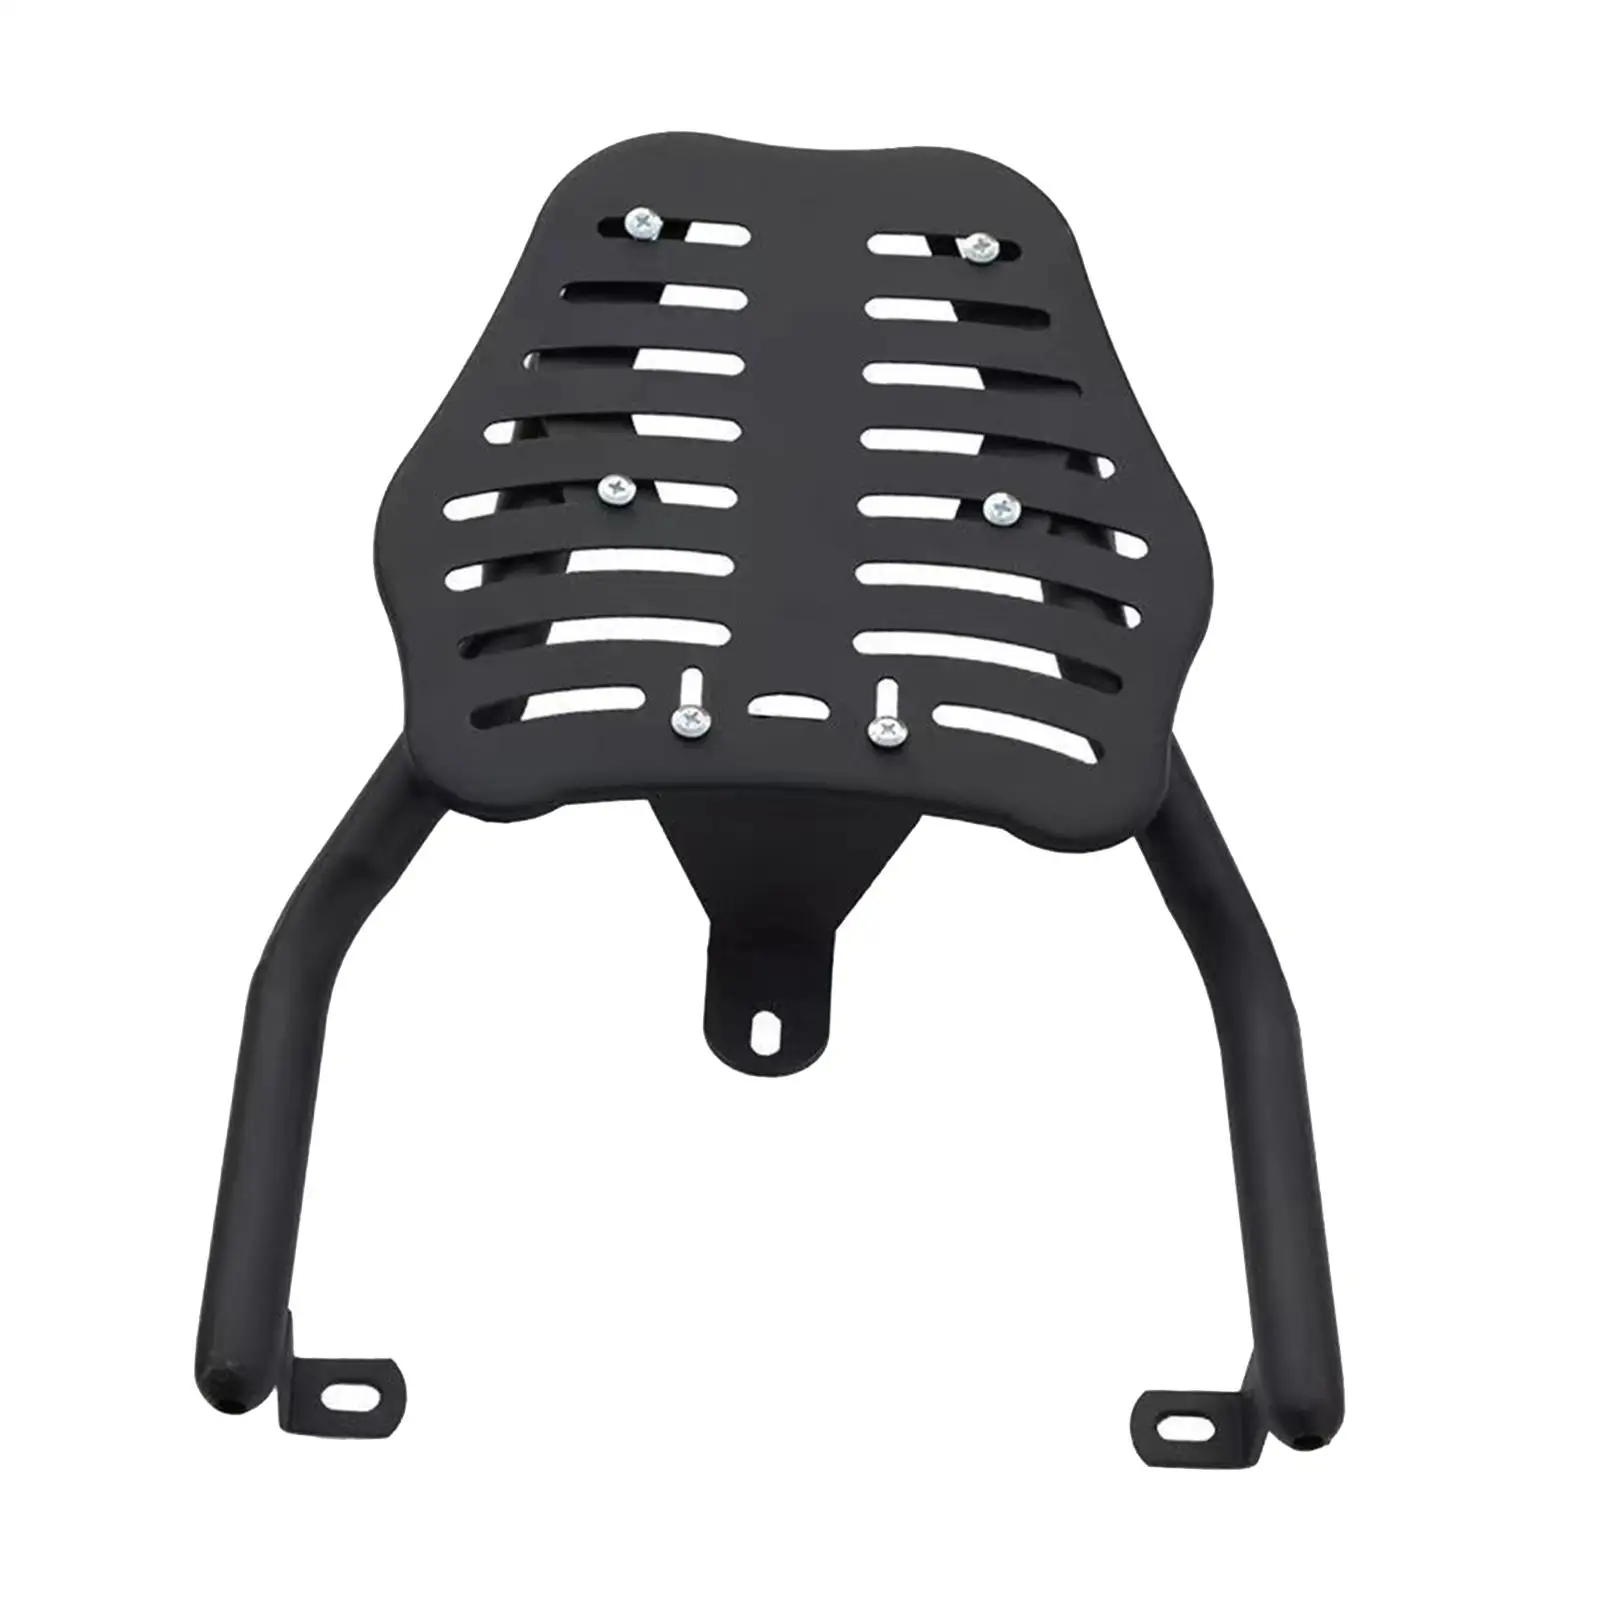 Rear Luggage Rack Carrier Durable Holder Replace Motorcycle Rear Fender Rack